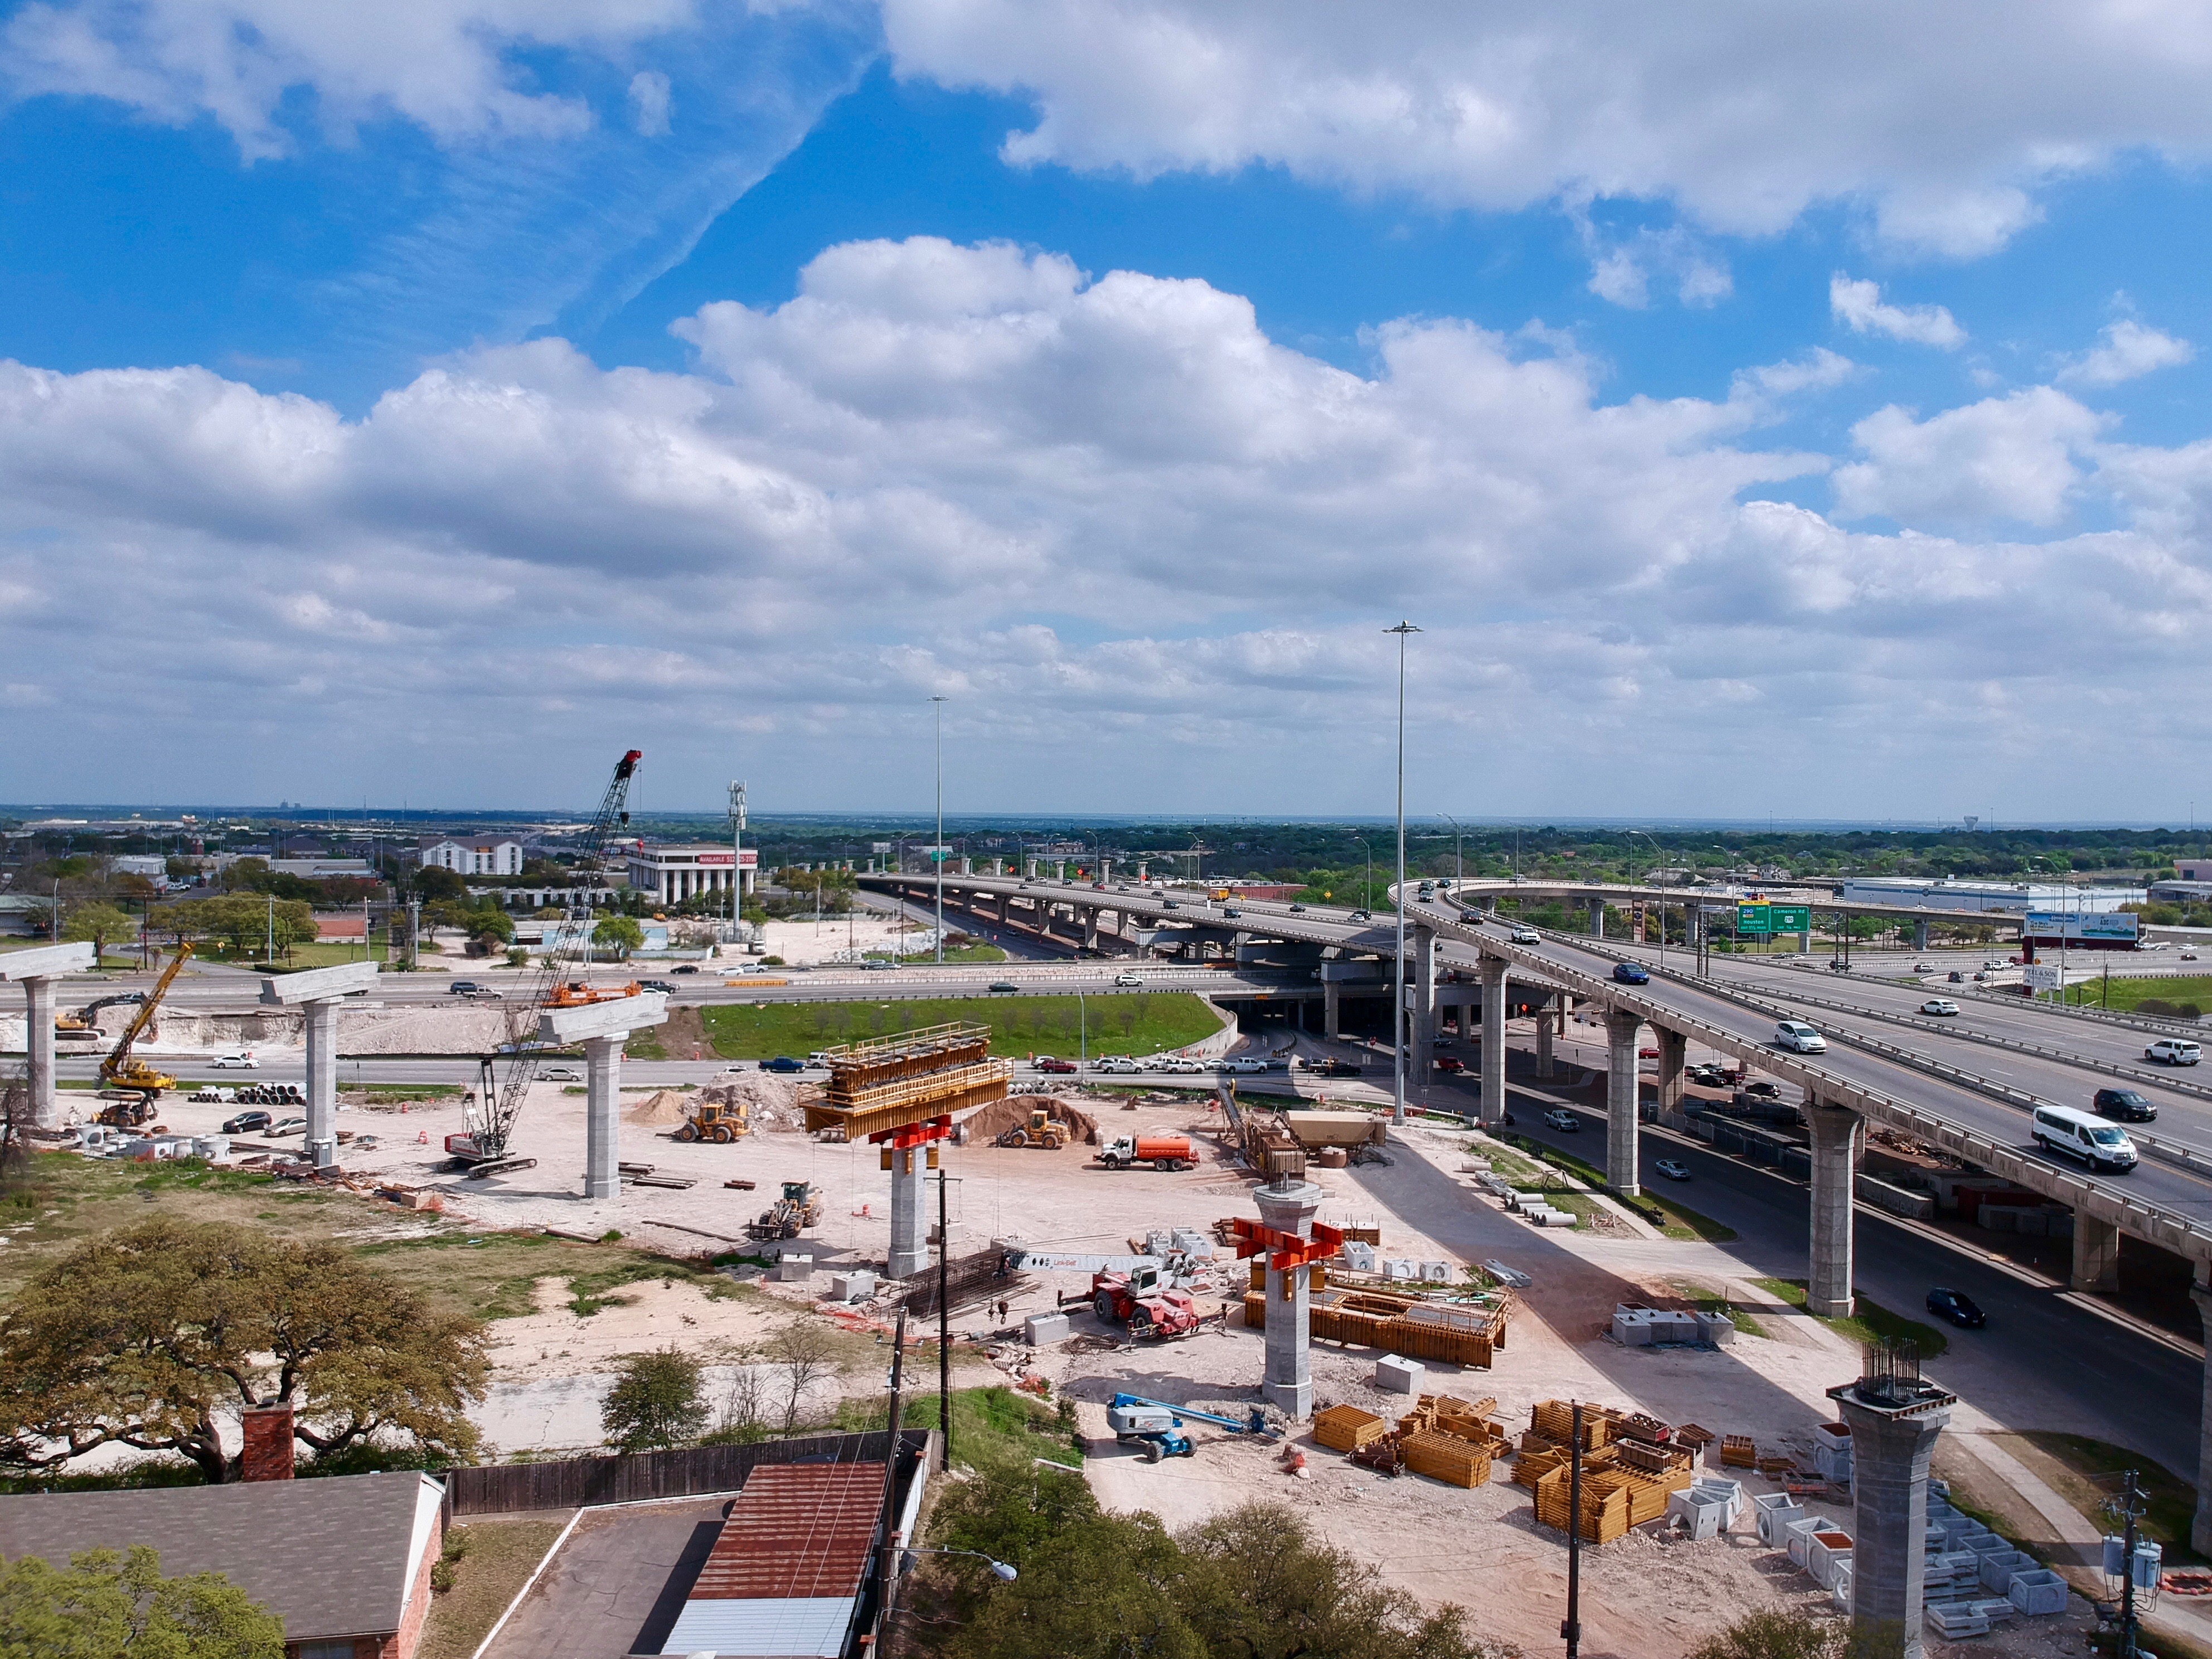 Southbound I-35 to northbound US 183 flyover progress - March 2019